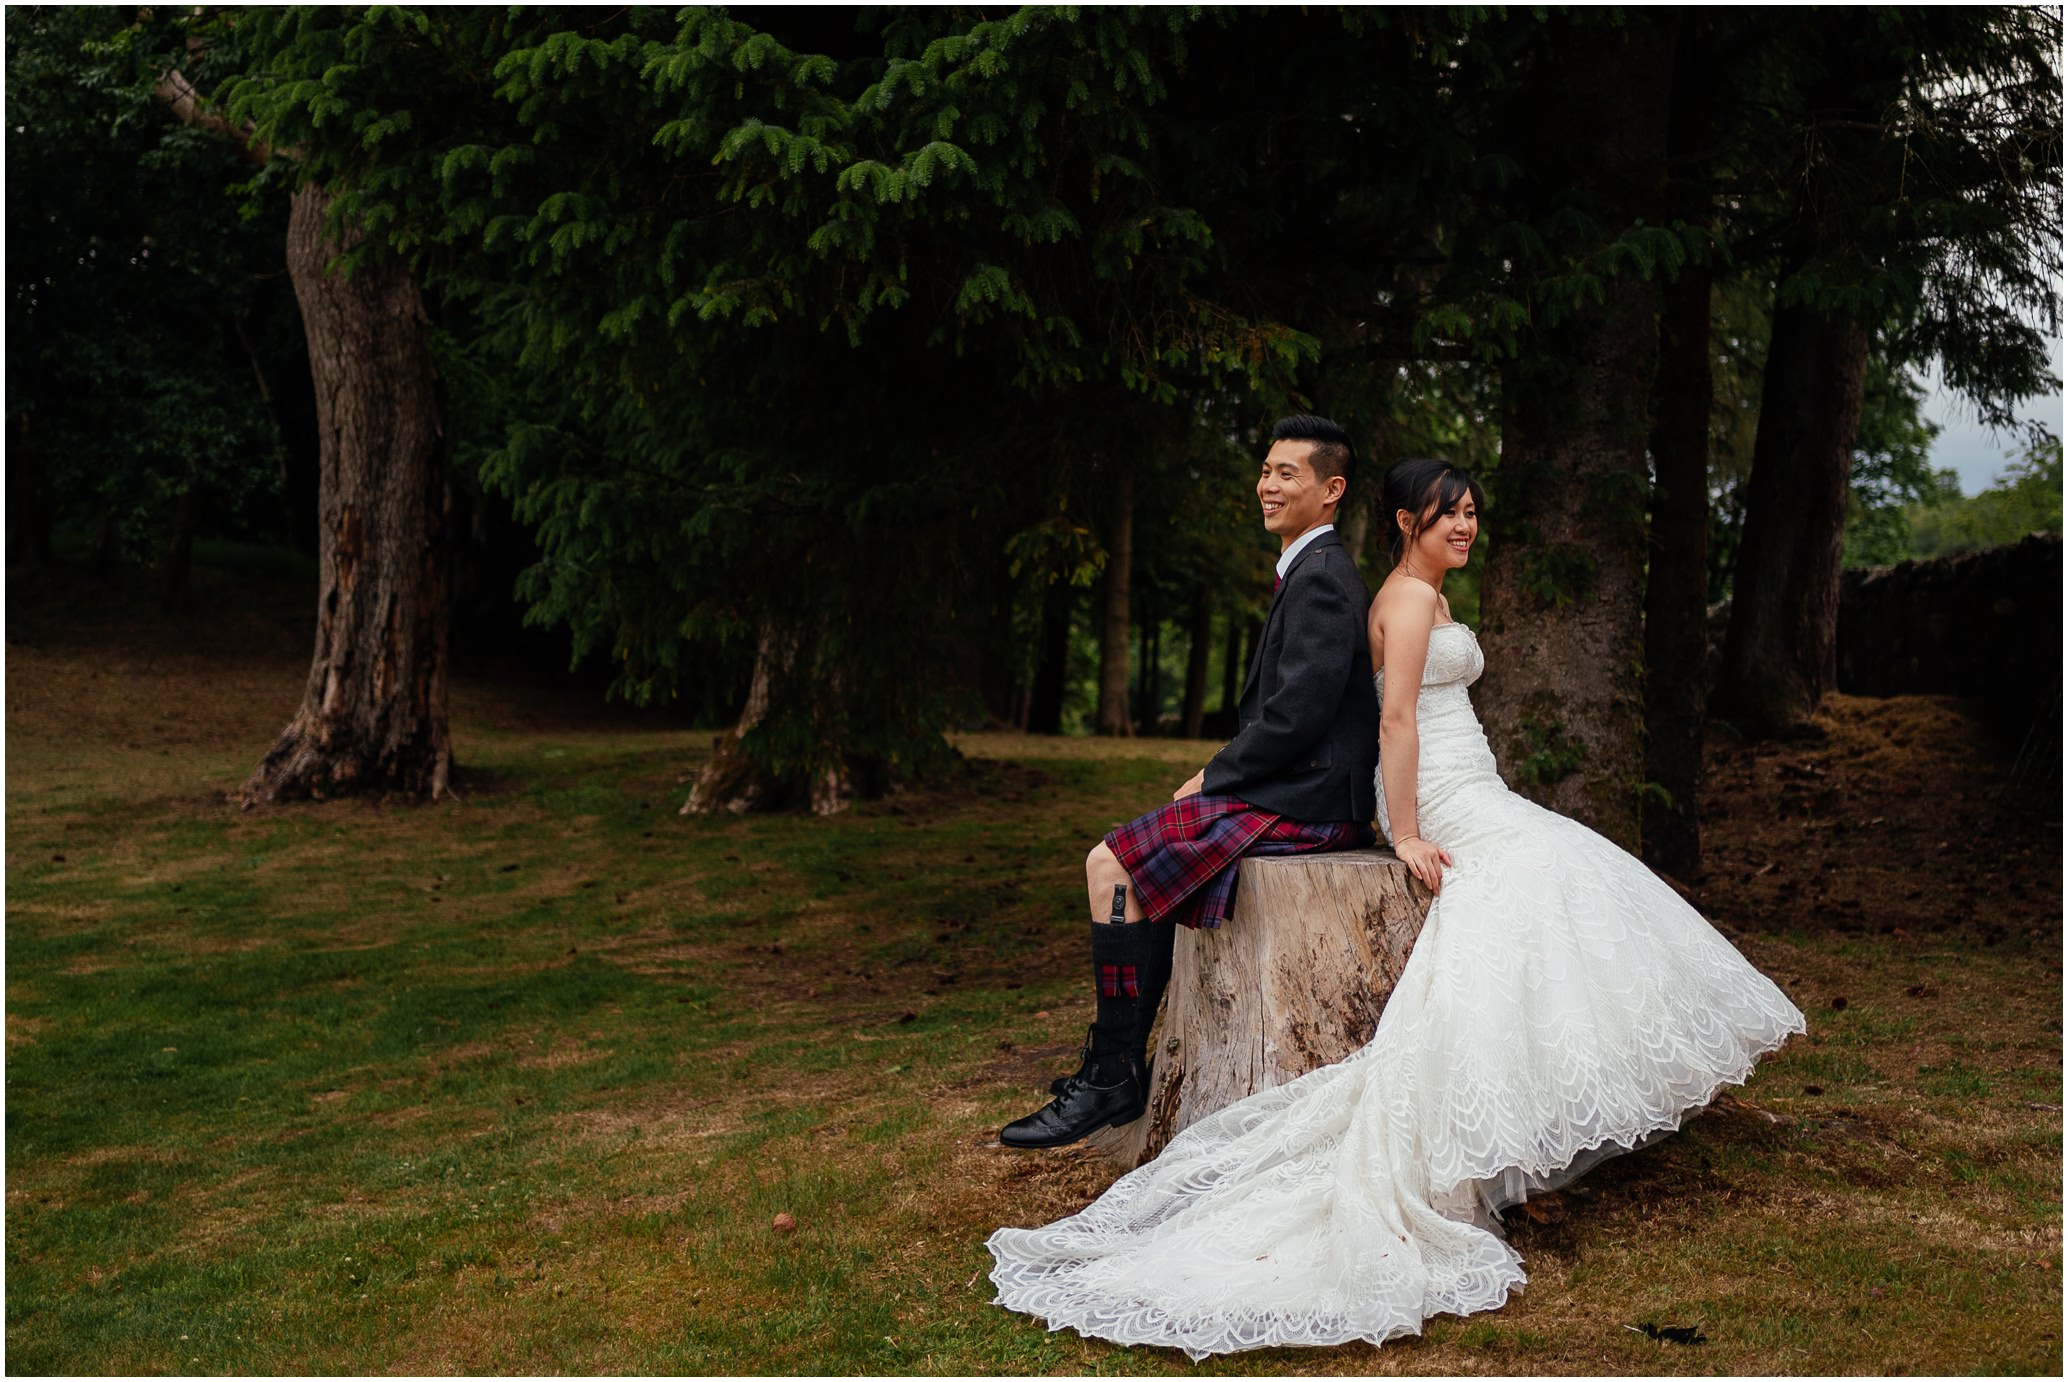 bride in white dress and groom in kilt outfit sitting back to back on tree stump surrounded by grass lawn and big trees in background post wedding photoshoot glasgow fotomaki photography